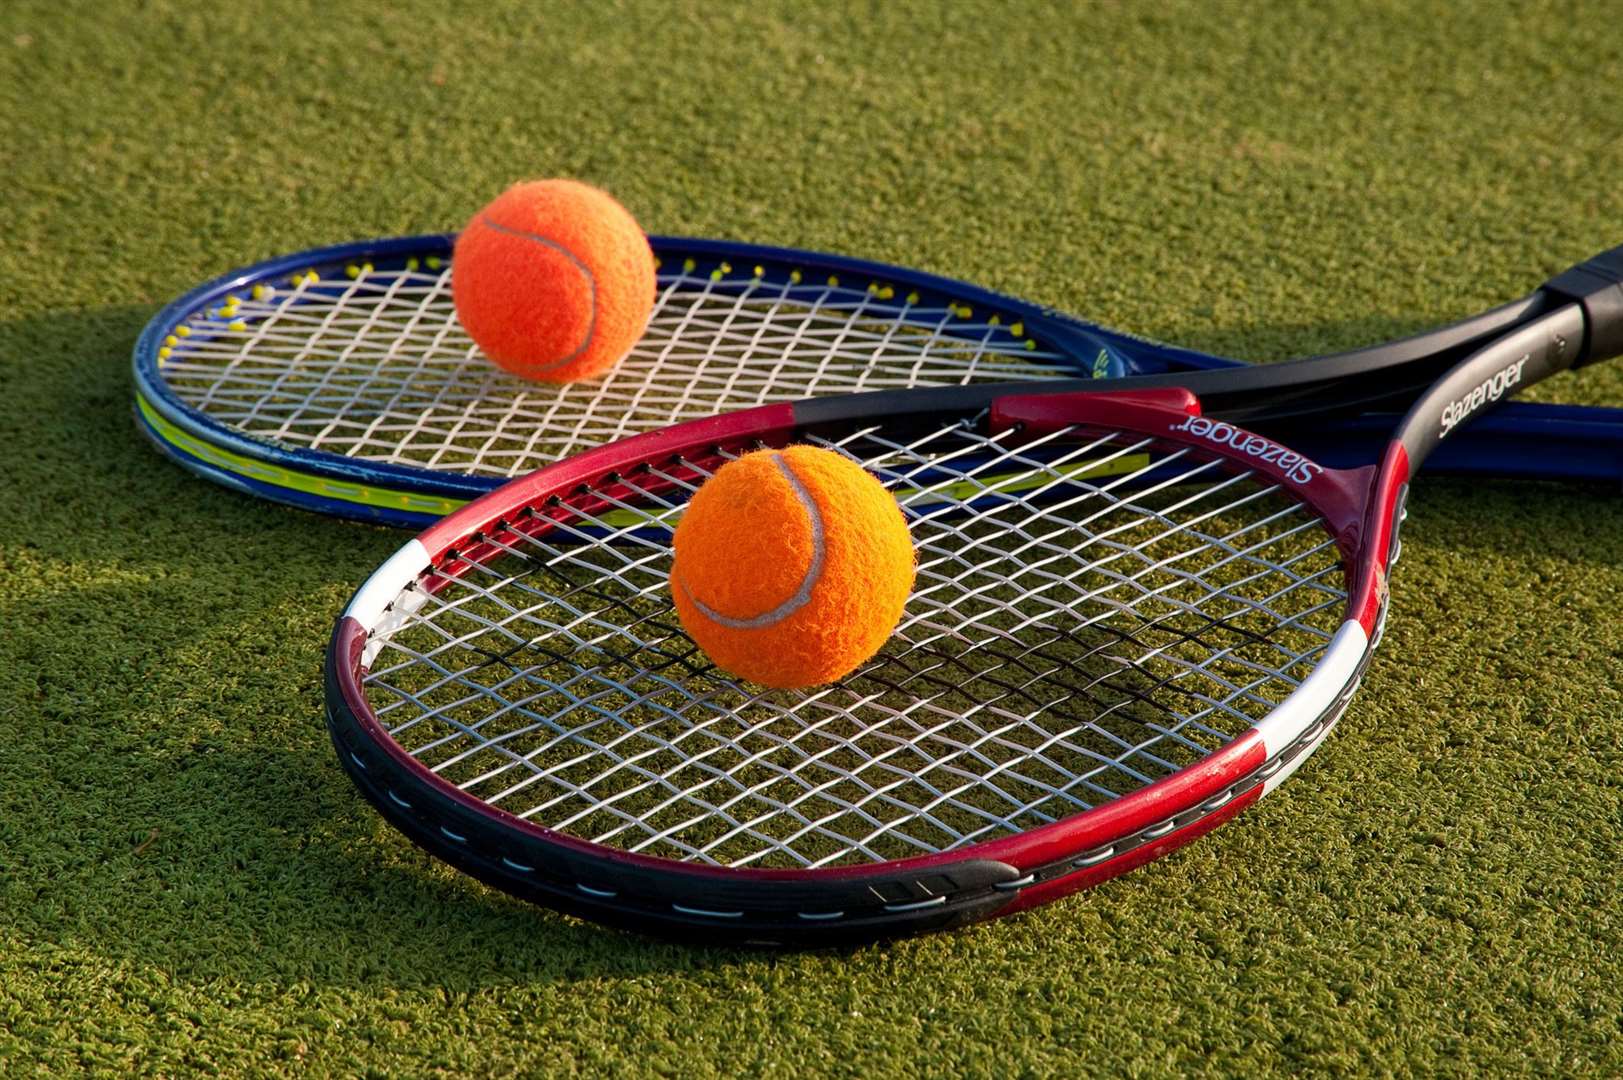 Aberdeenshire Council has introduced a booking system for tennis courts.